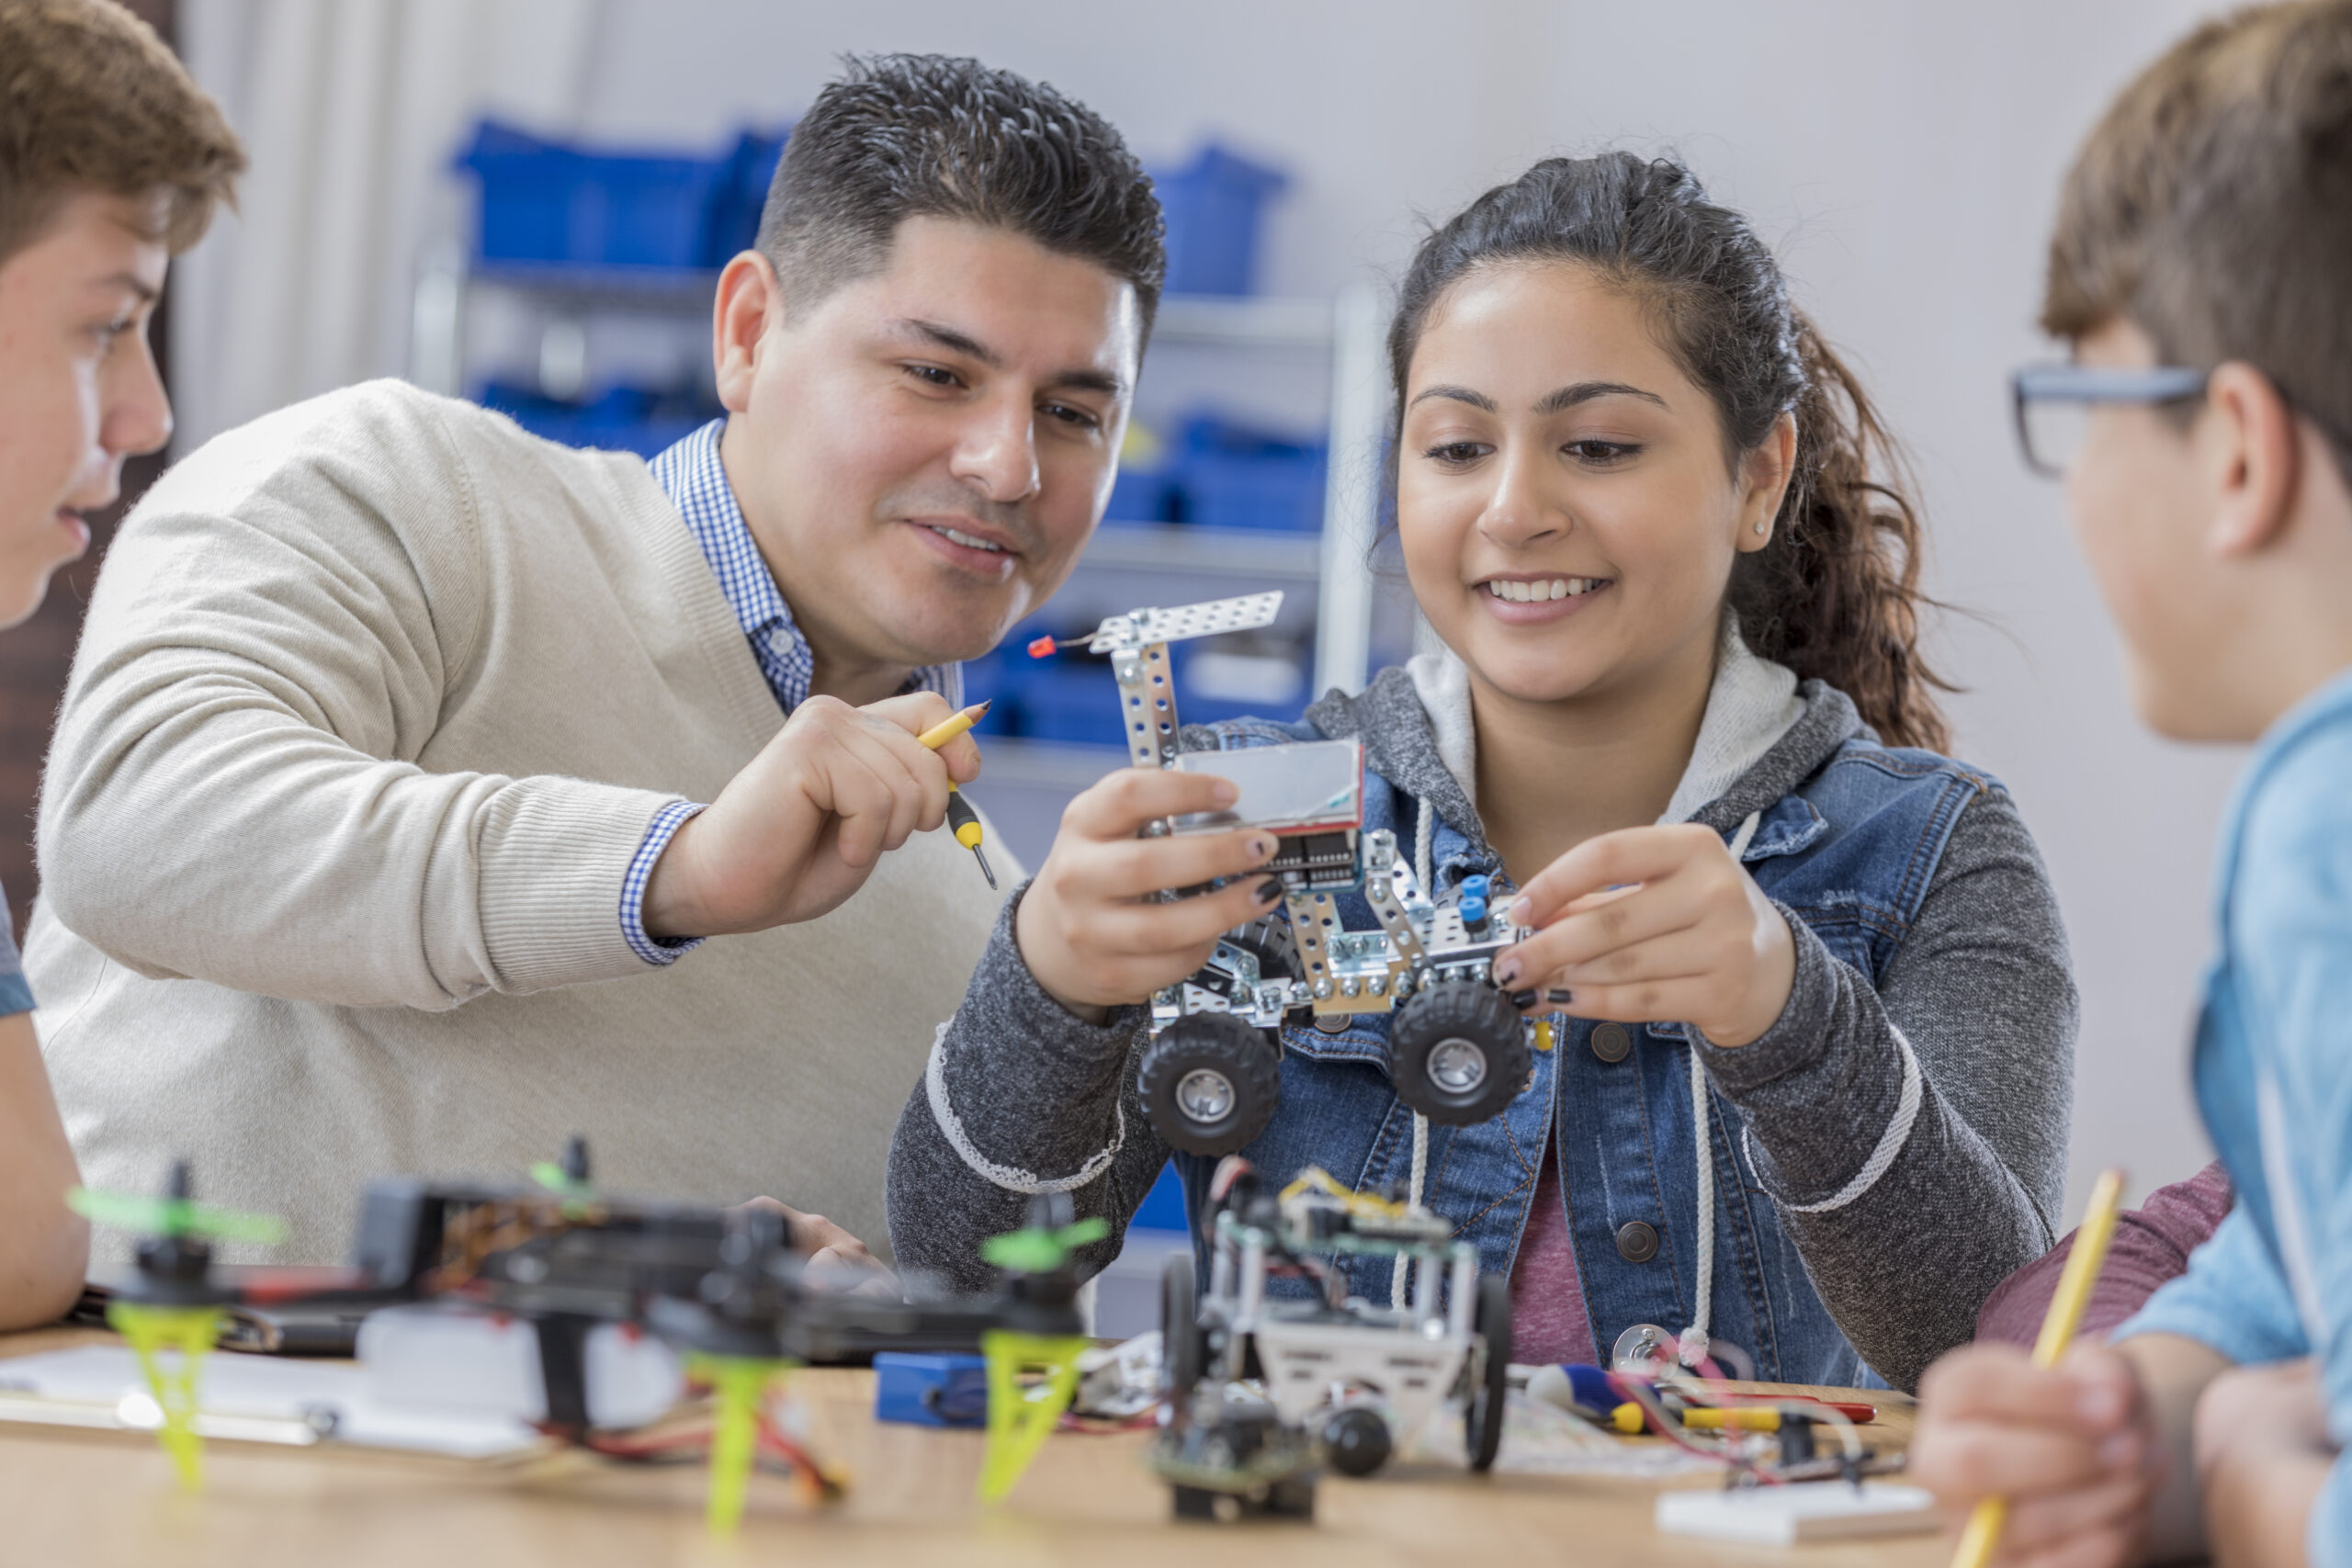 Confident mid adult Hispanic teacher helps a female student with a robotics assignment. The student is holding a robotic vehicle. Robot parts are on the table.